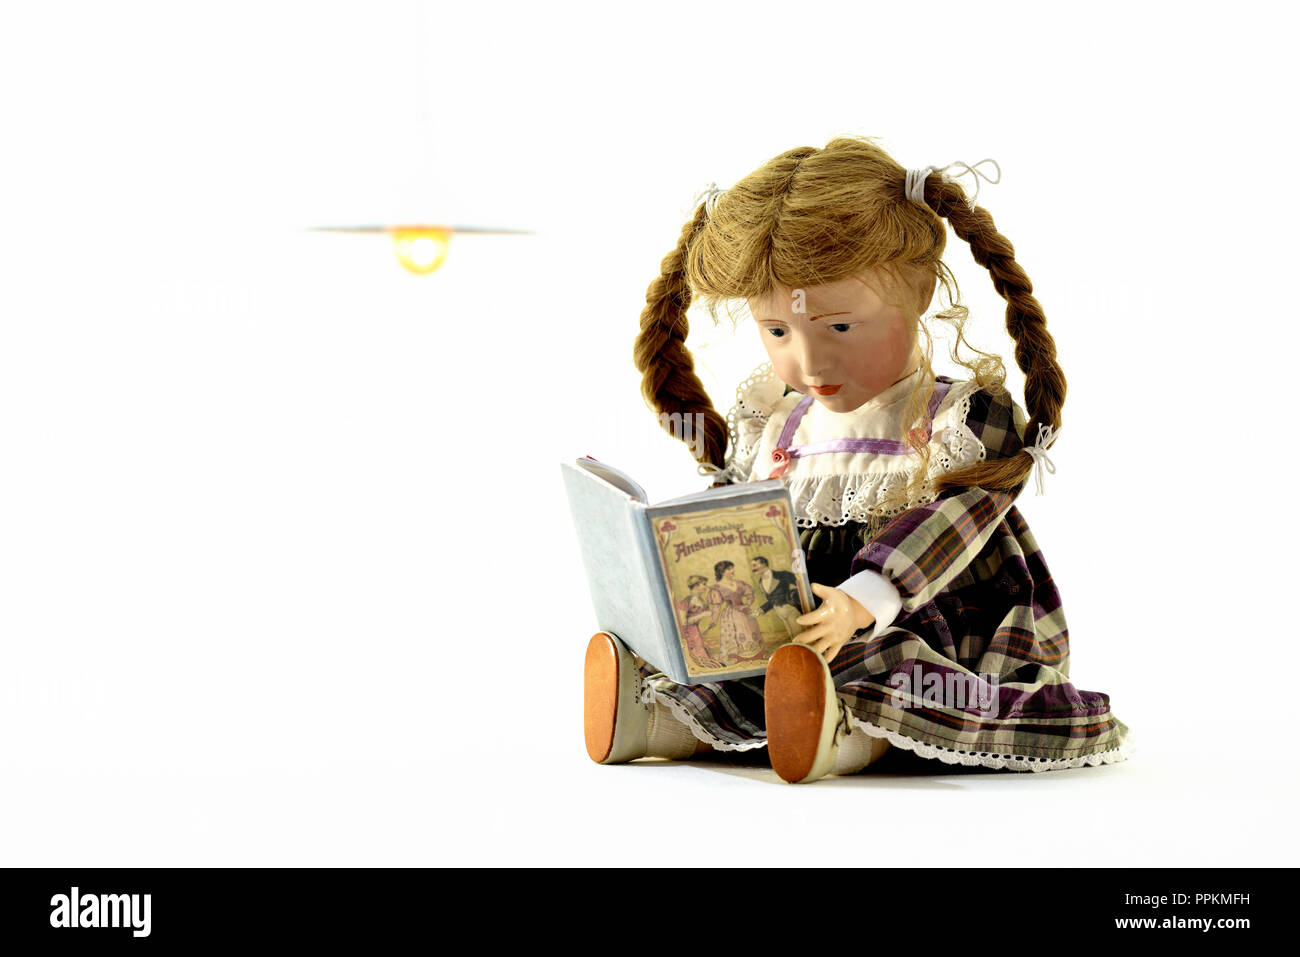 doll Elise sits and is reading a book about decency (Germany). Puppe Elise liest ein Buch über Anstands-Lehre (Deutschland). Stock Photo